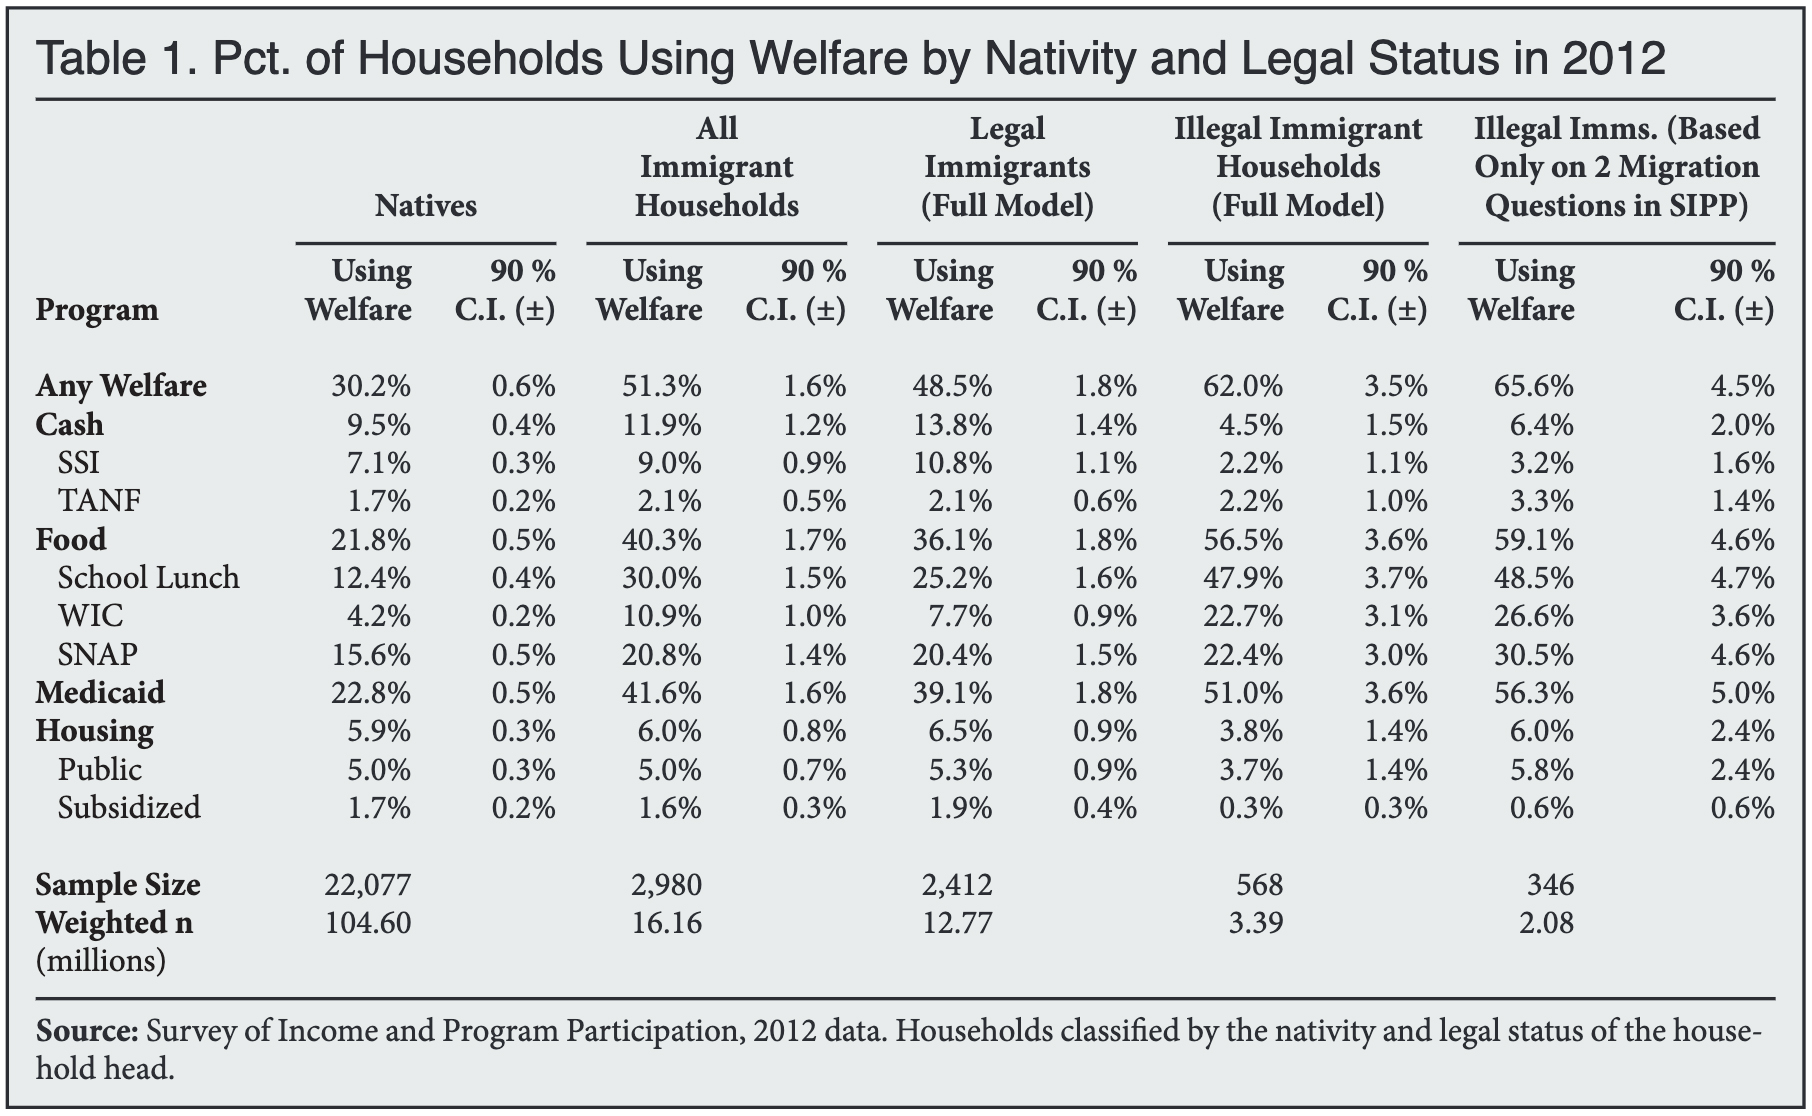 Table: Percent of Households Using Welfare by Nativity and Legal Status in 2012